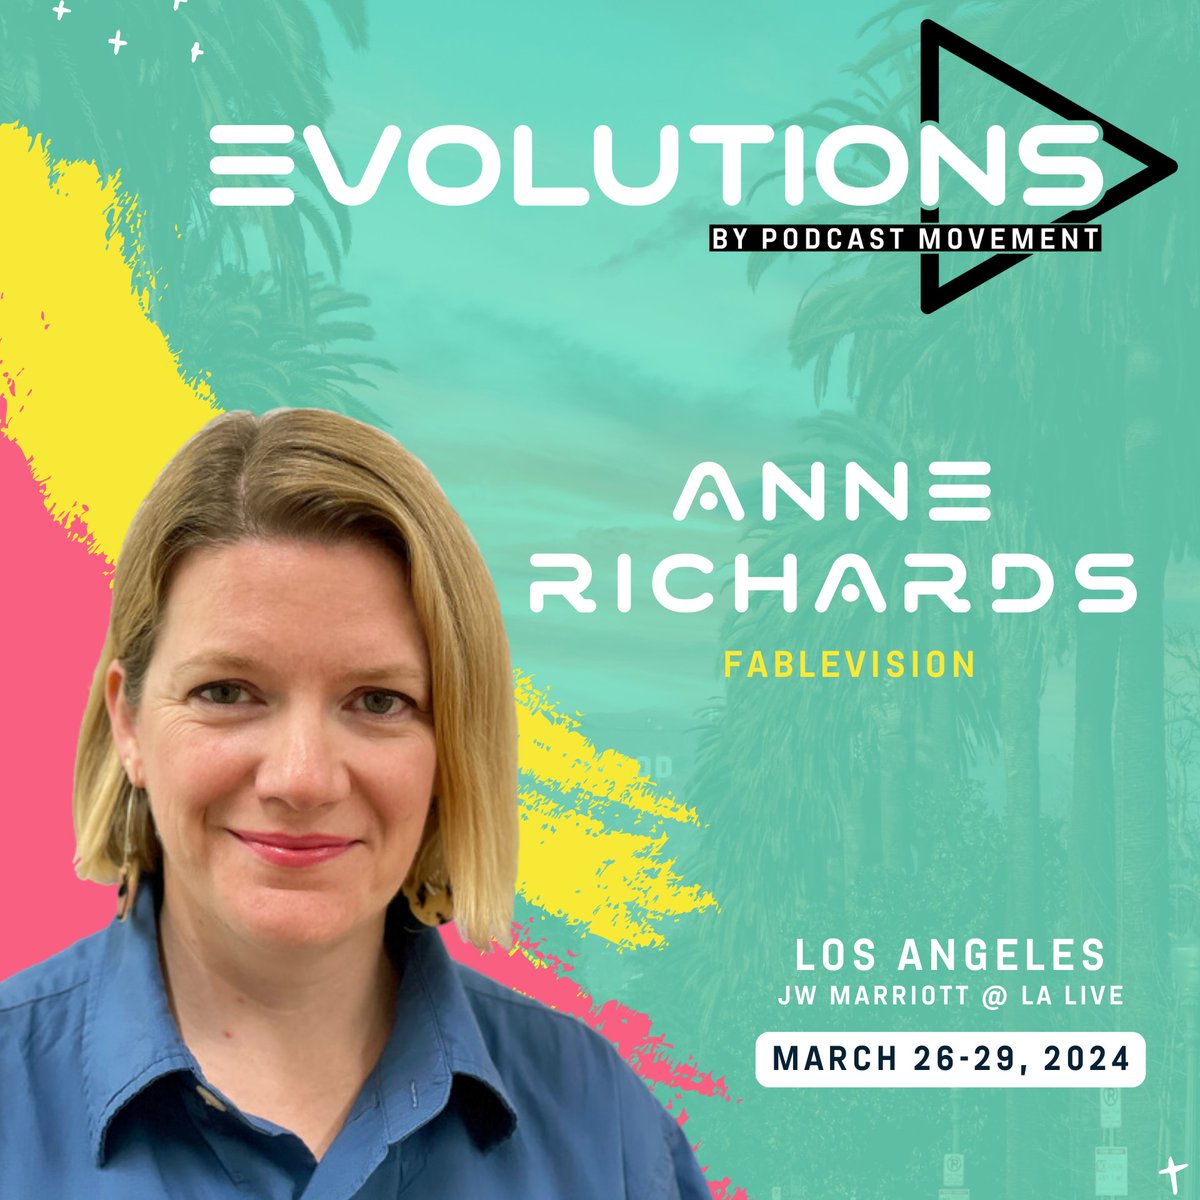 Attention all @podcastmovement LA attendees! Anne Richards' panel, “World of Kids & Family Audio & Video Podcasting,” is today at 10:30 a.m. PST in Platinum E! bit.ly/43wthHV